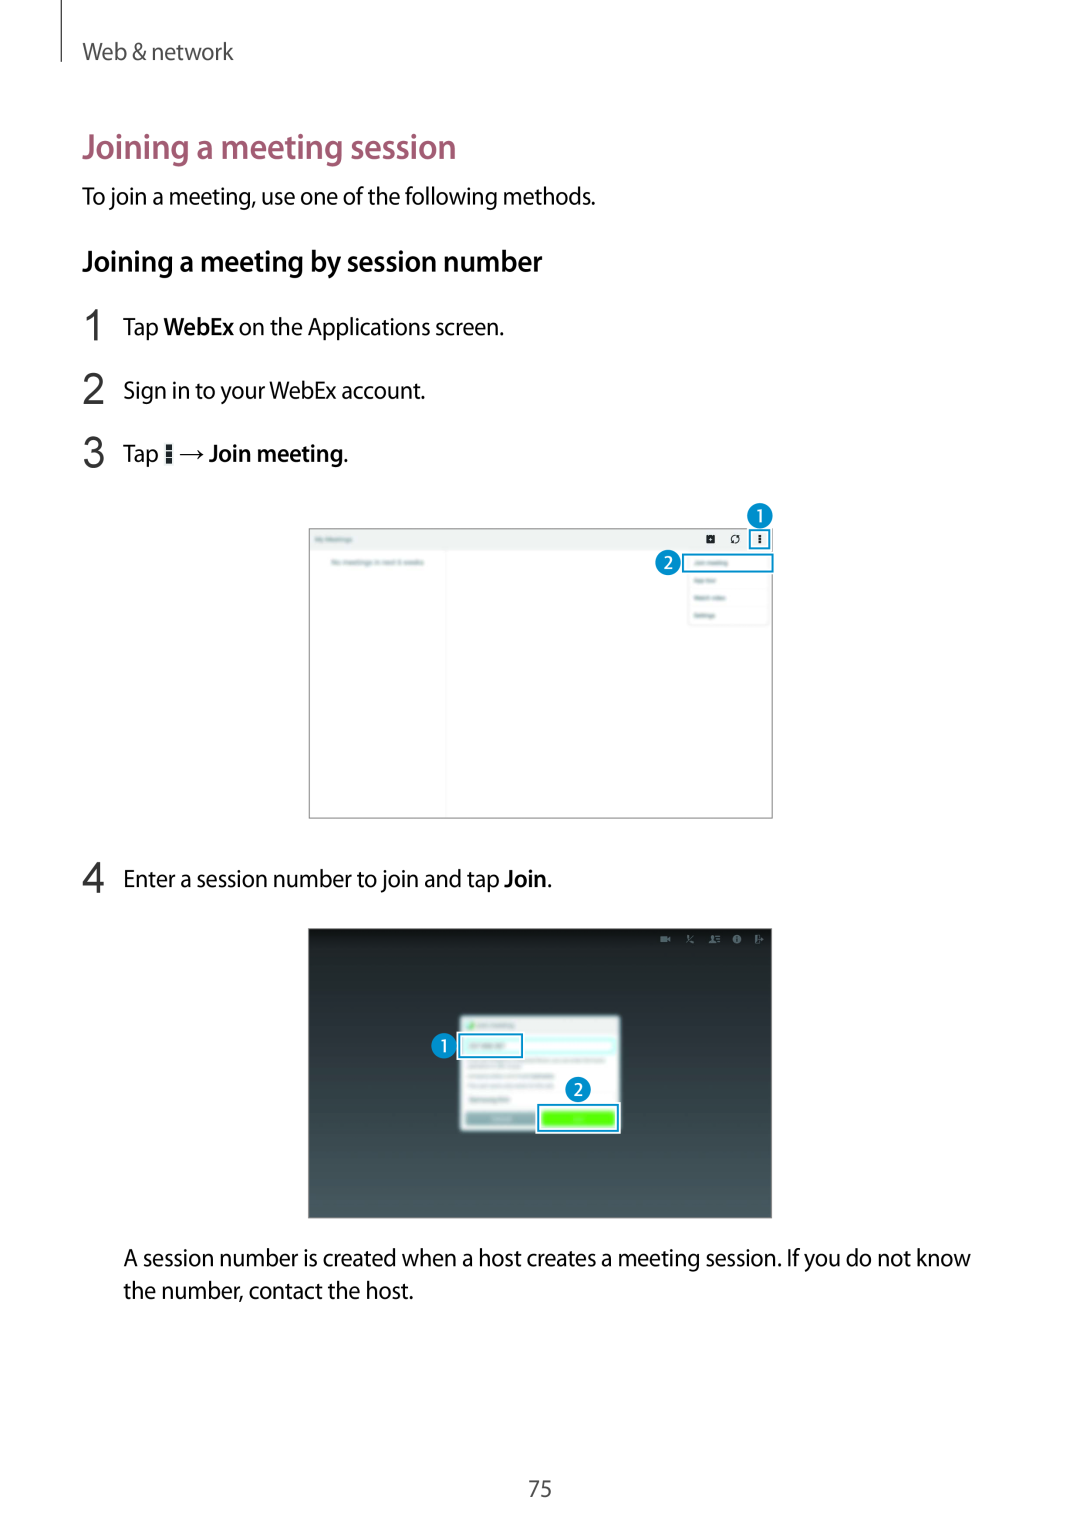 Samsung SM-P9000ZWATPH Joining a meeting session, Joining a meeting by session number, Tap →Join meeting, Web & network 